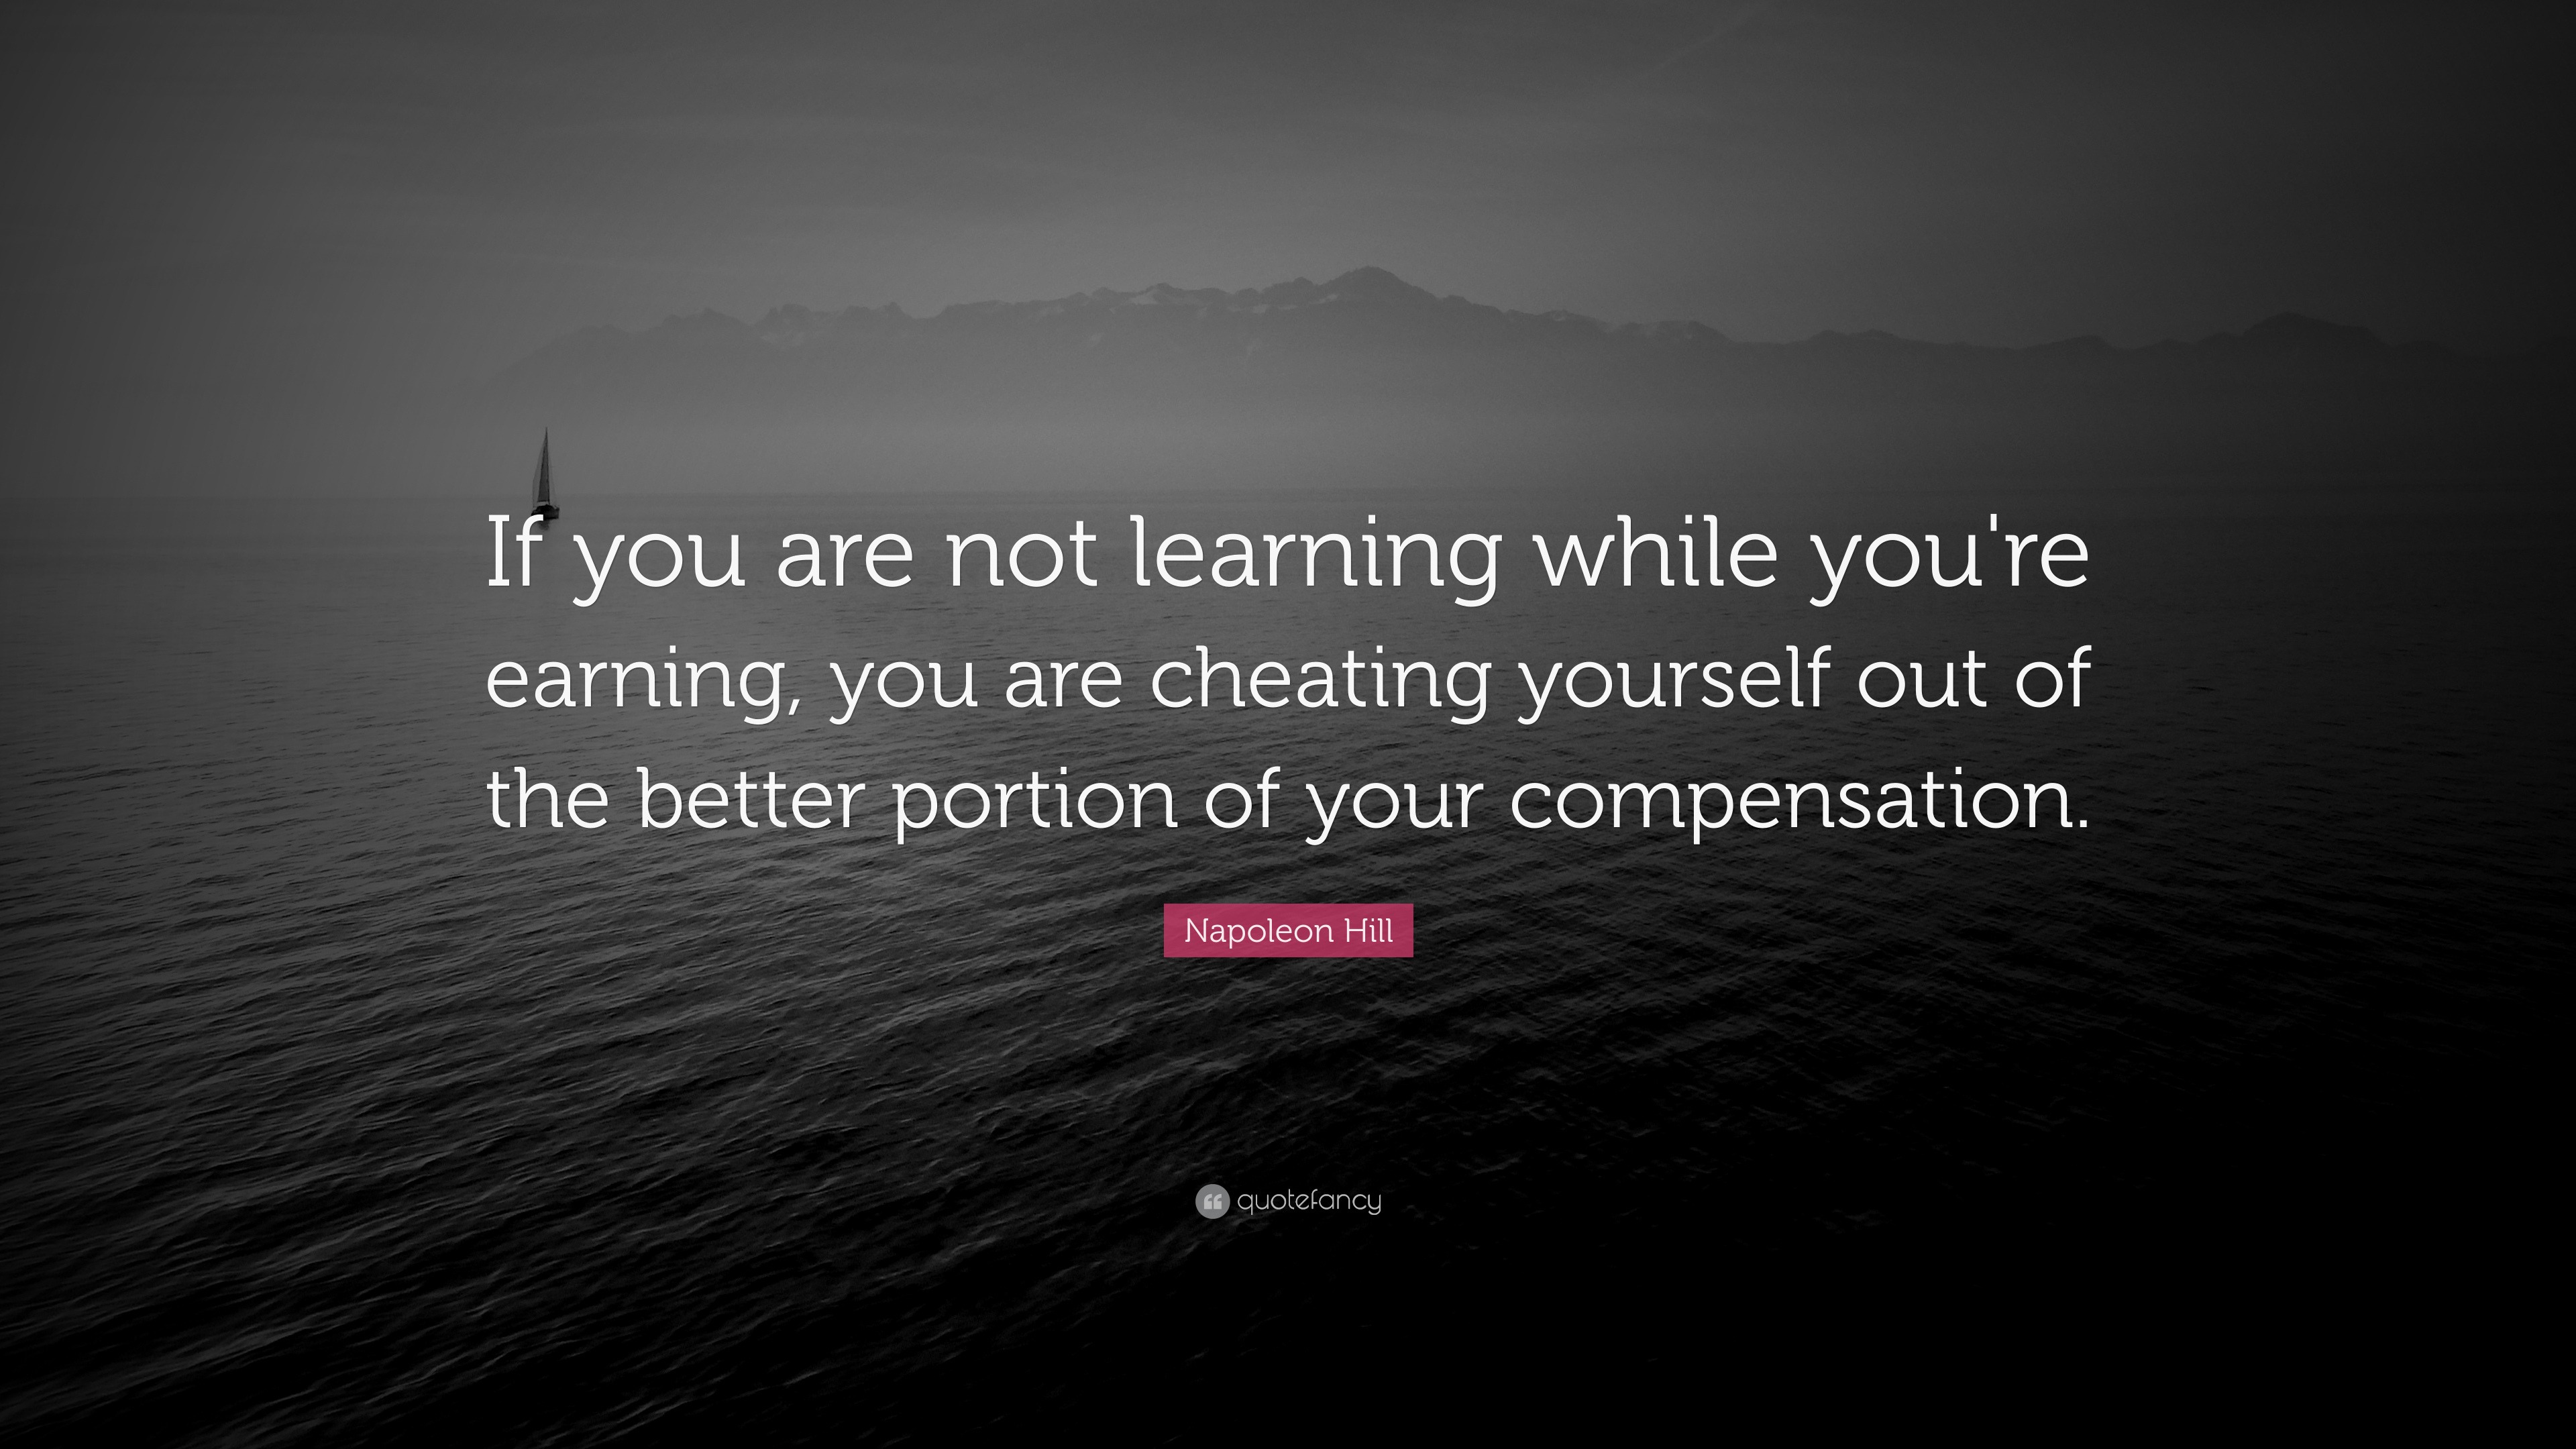 Napoleon Hill Quote: "If you are not learning while you're earning, you are cheating yourself ...